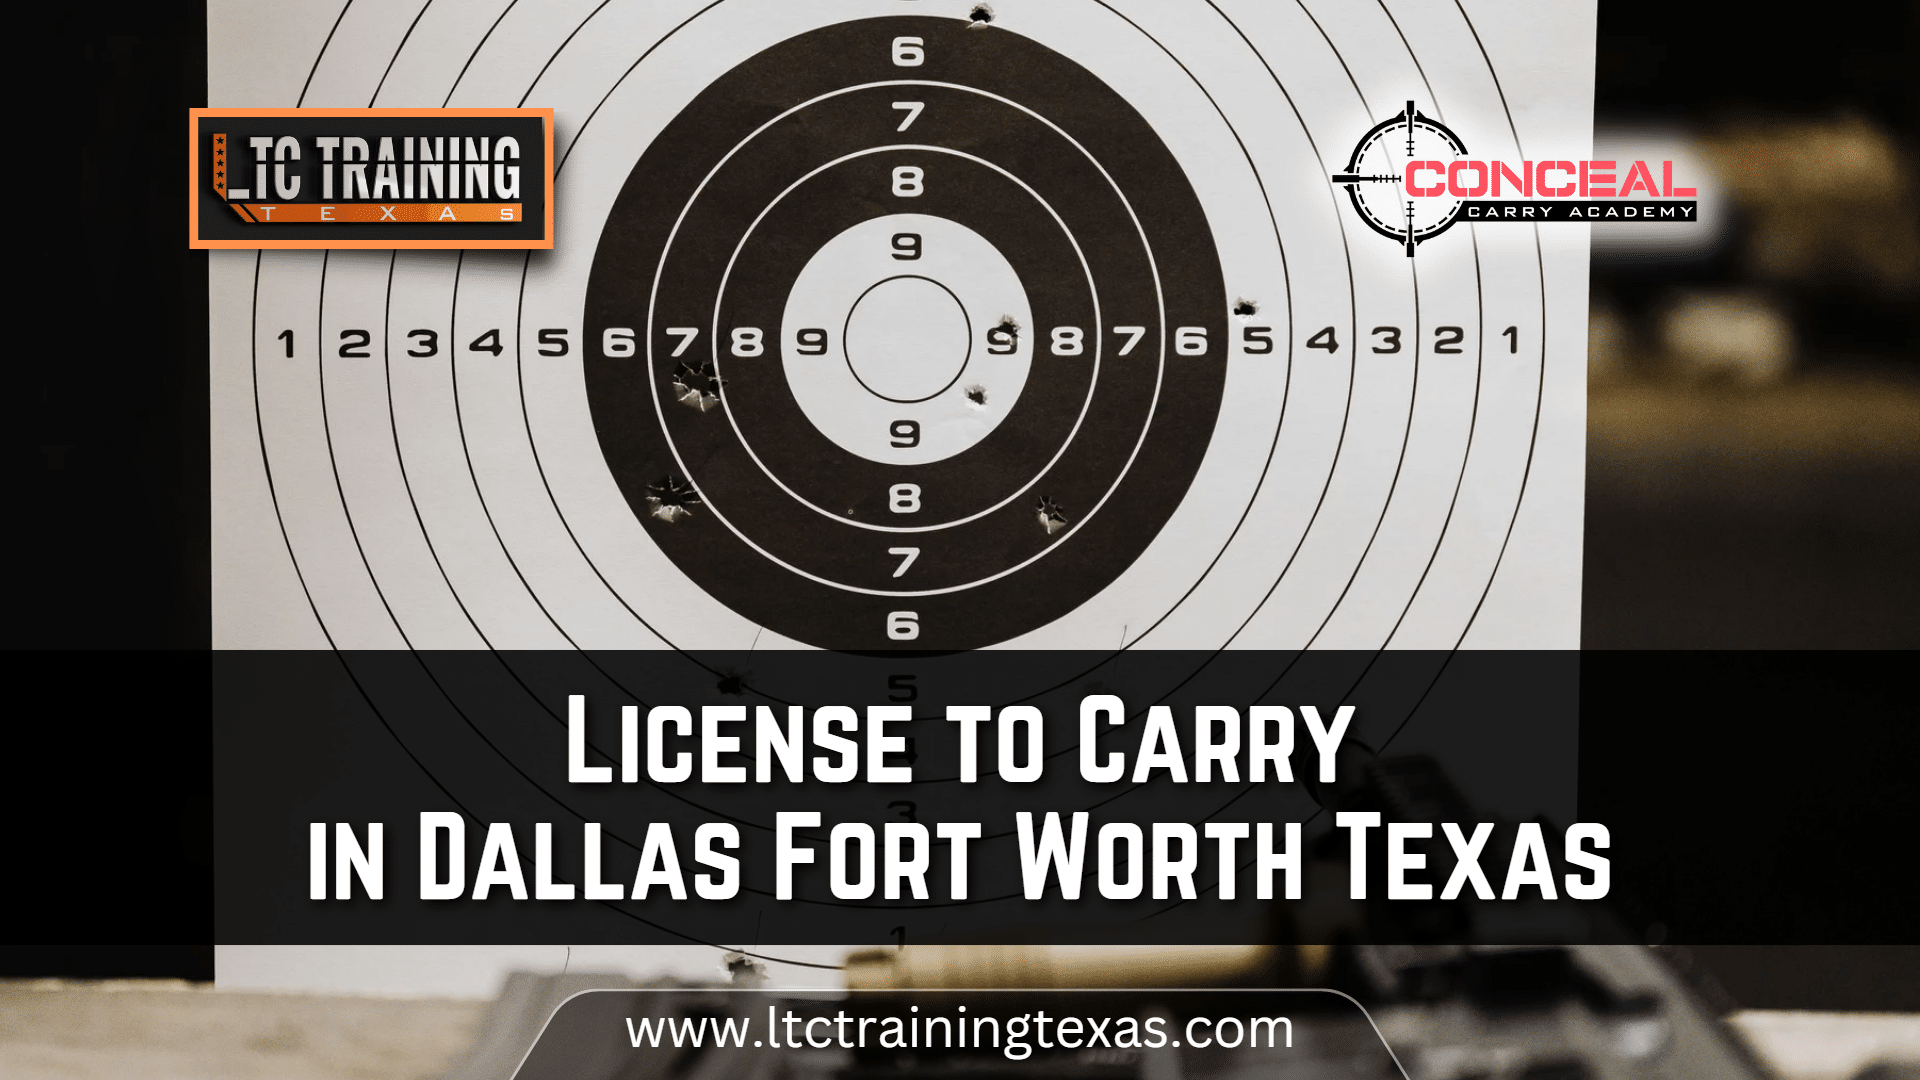 License to Carry in Dallas Fort Worth Texas